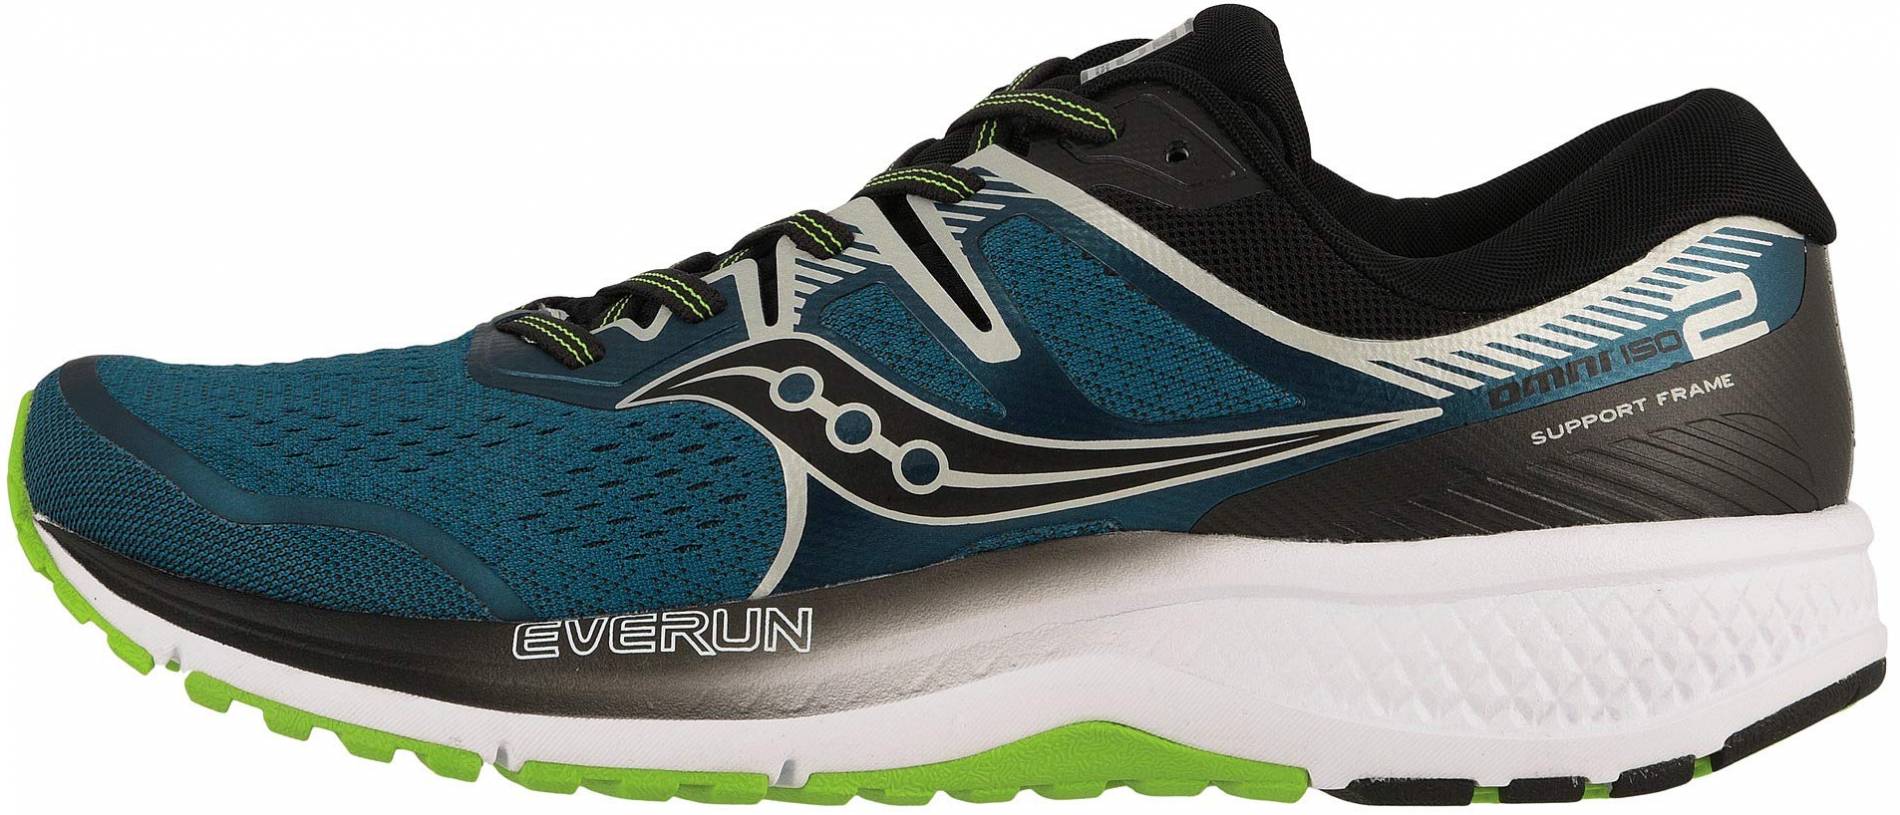 Save 55% on Running Shoes (2398 Models 